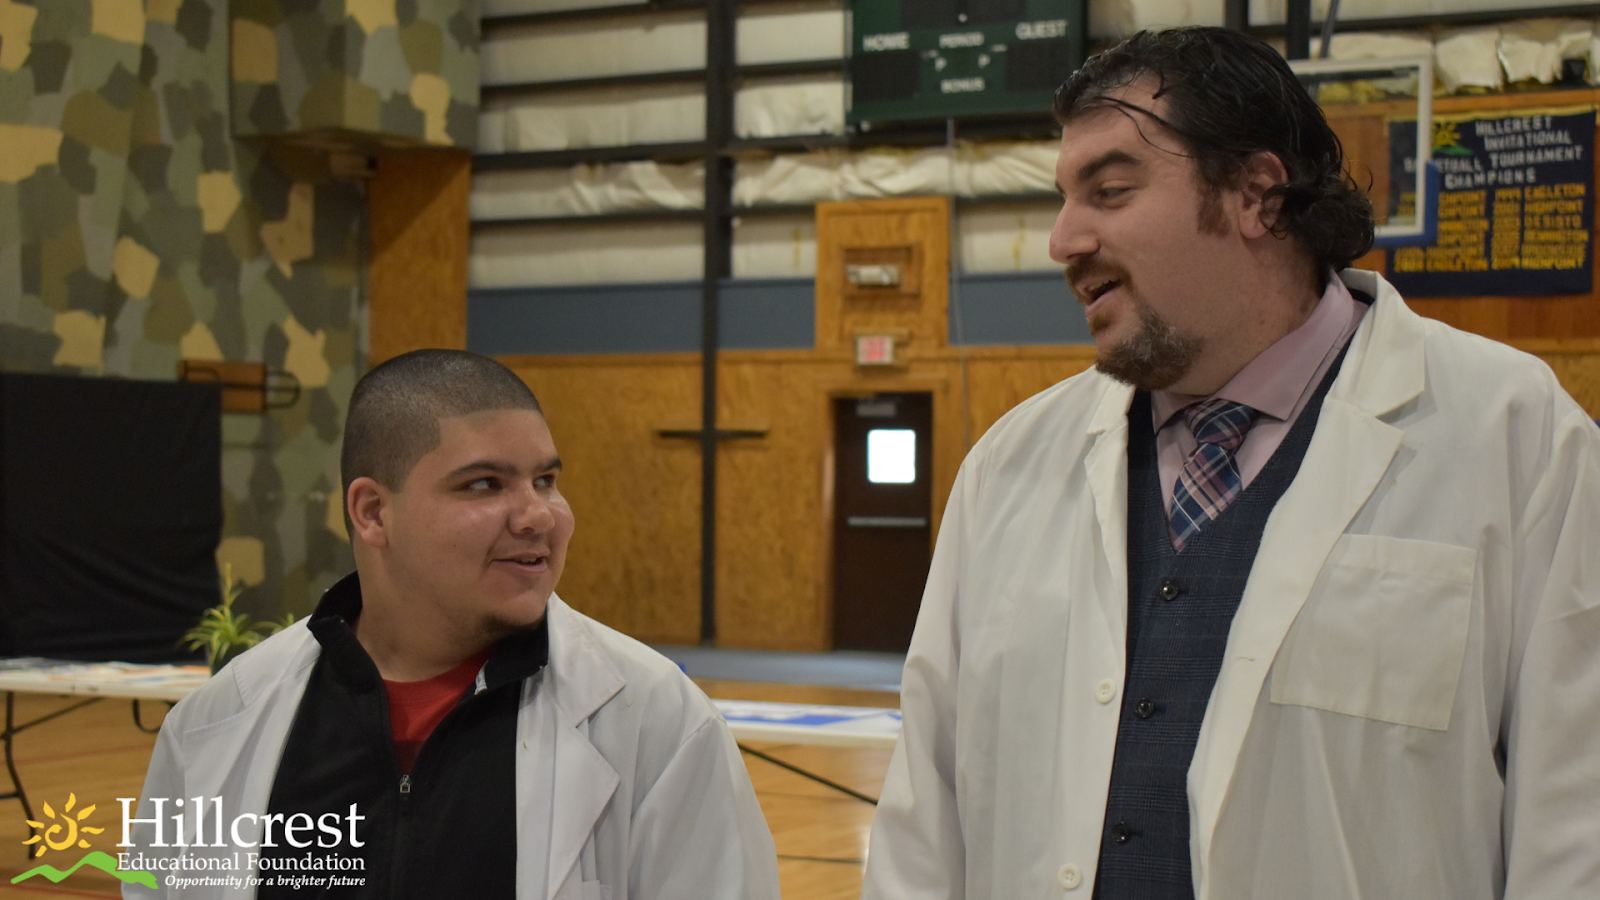 Mr. Quinlan and one of his students wearing matching lab coats at the art & science fair at Highpoint.